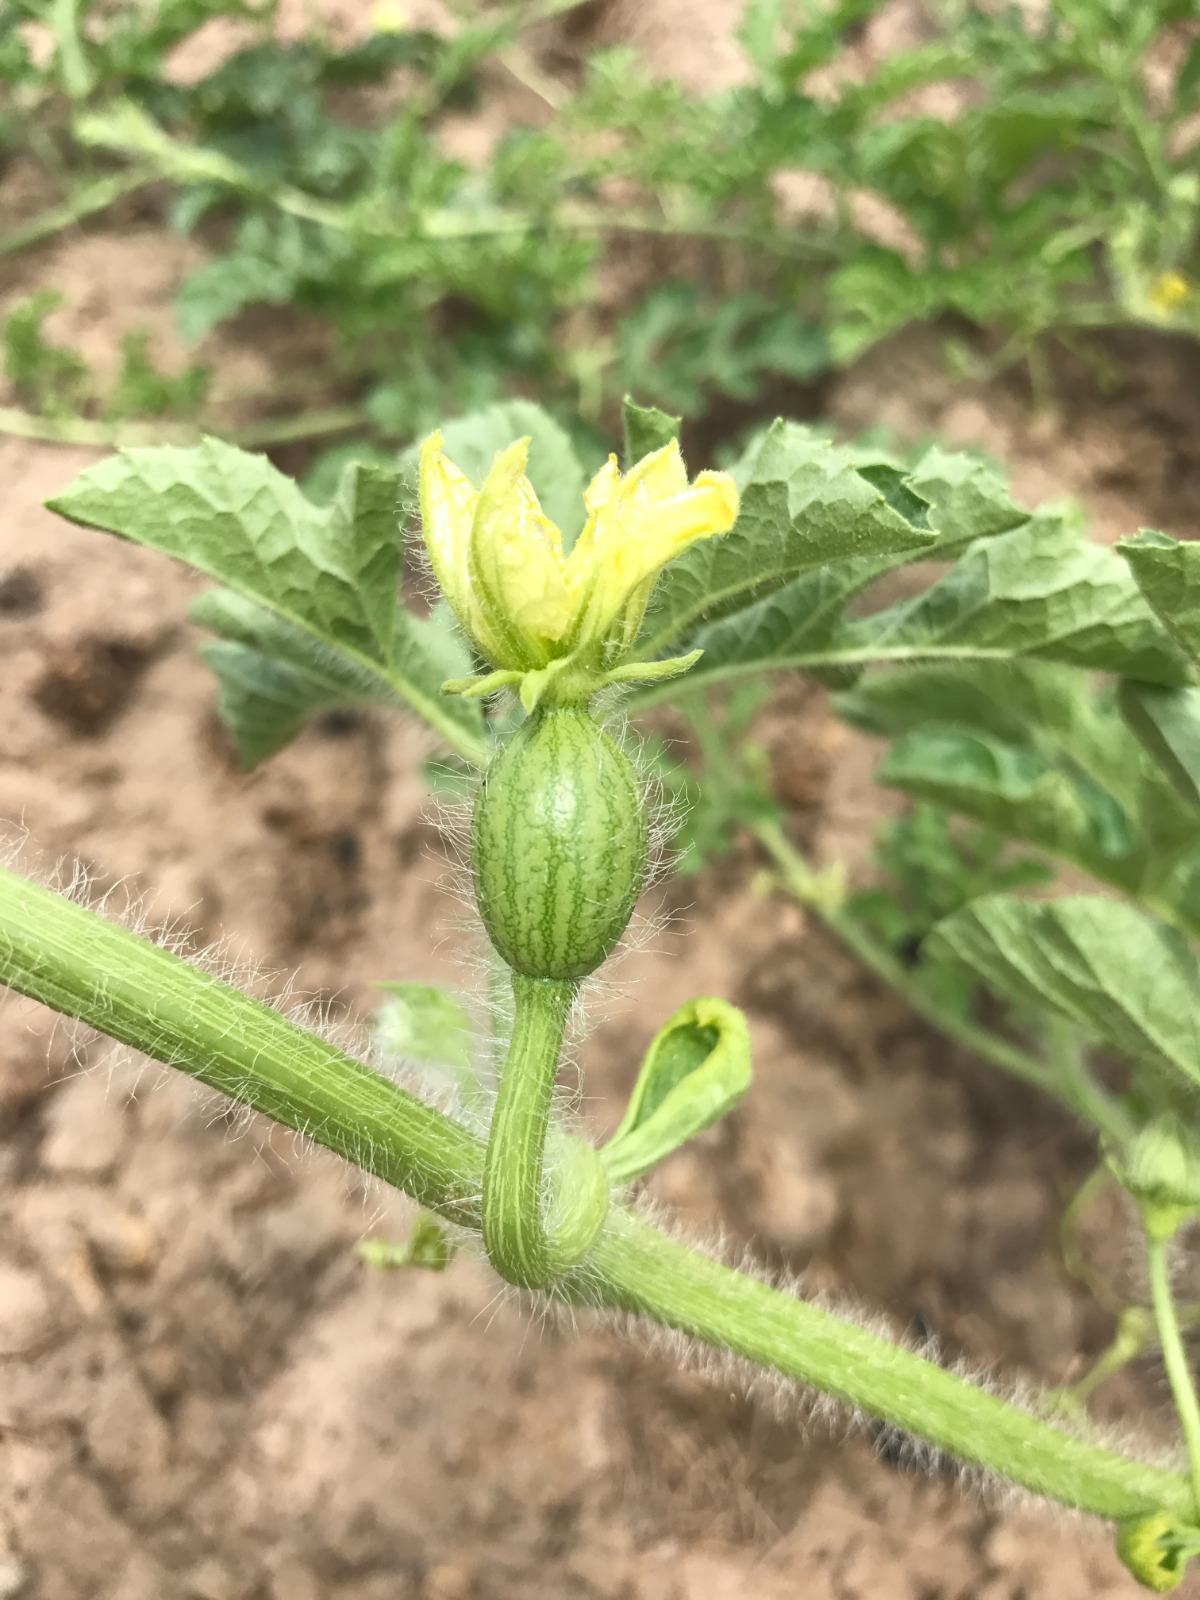 Seedless Watermelon Growing - Female Triploid Watermelon and Flower - Photo Courtesy of Melon 1